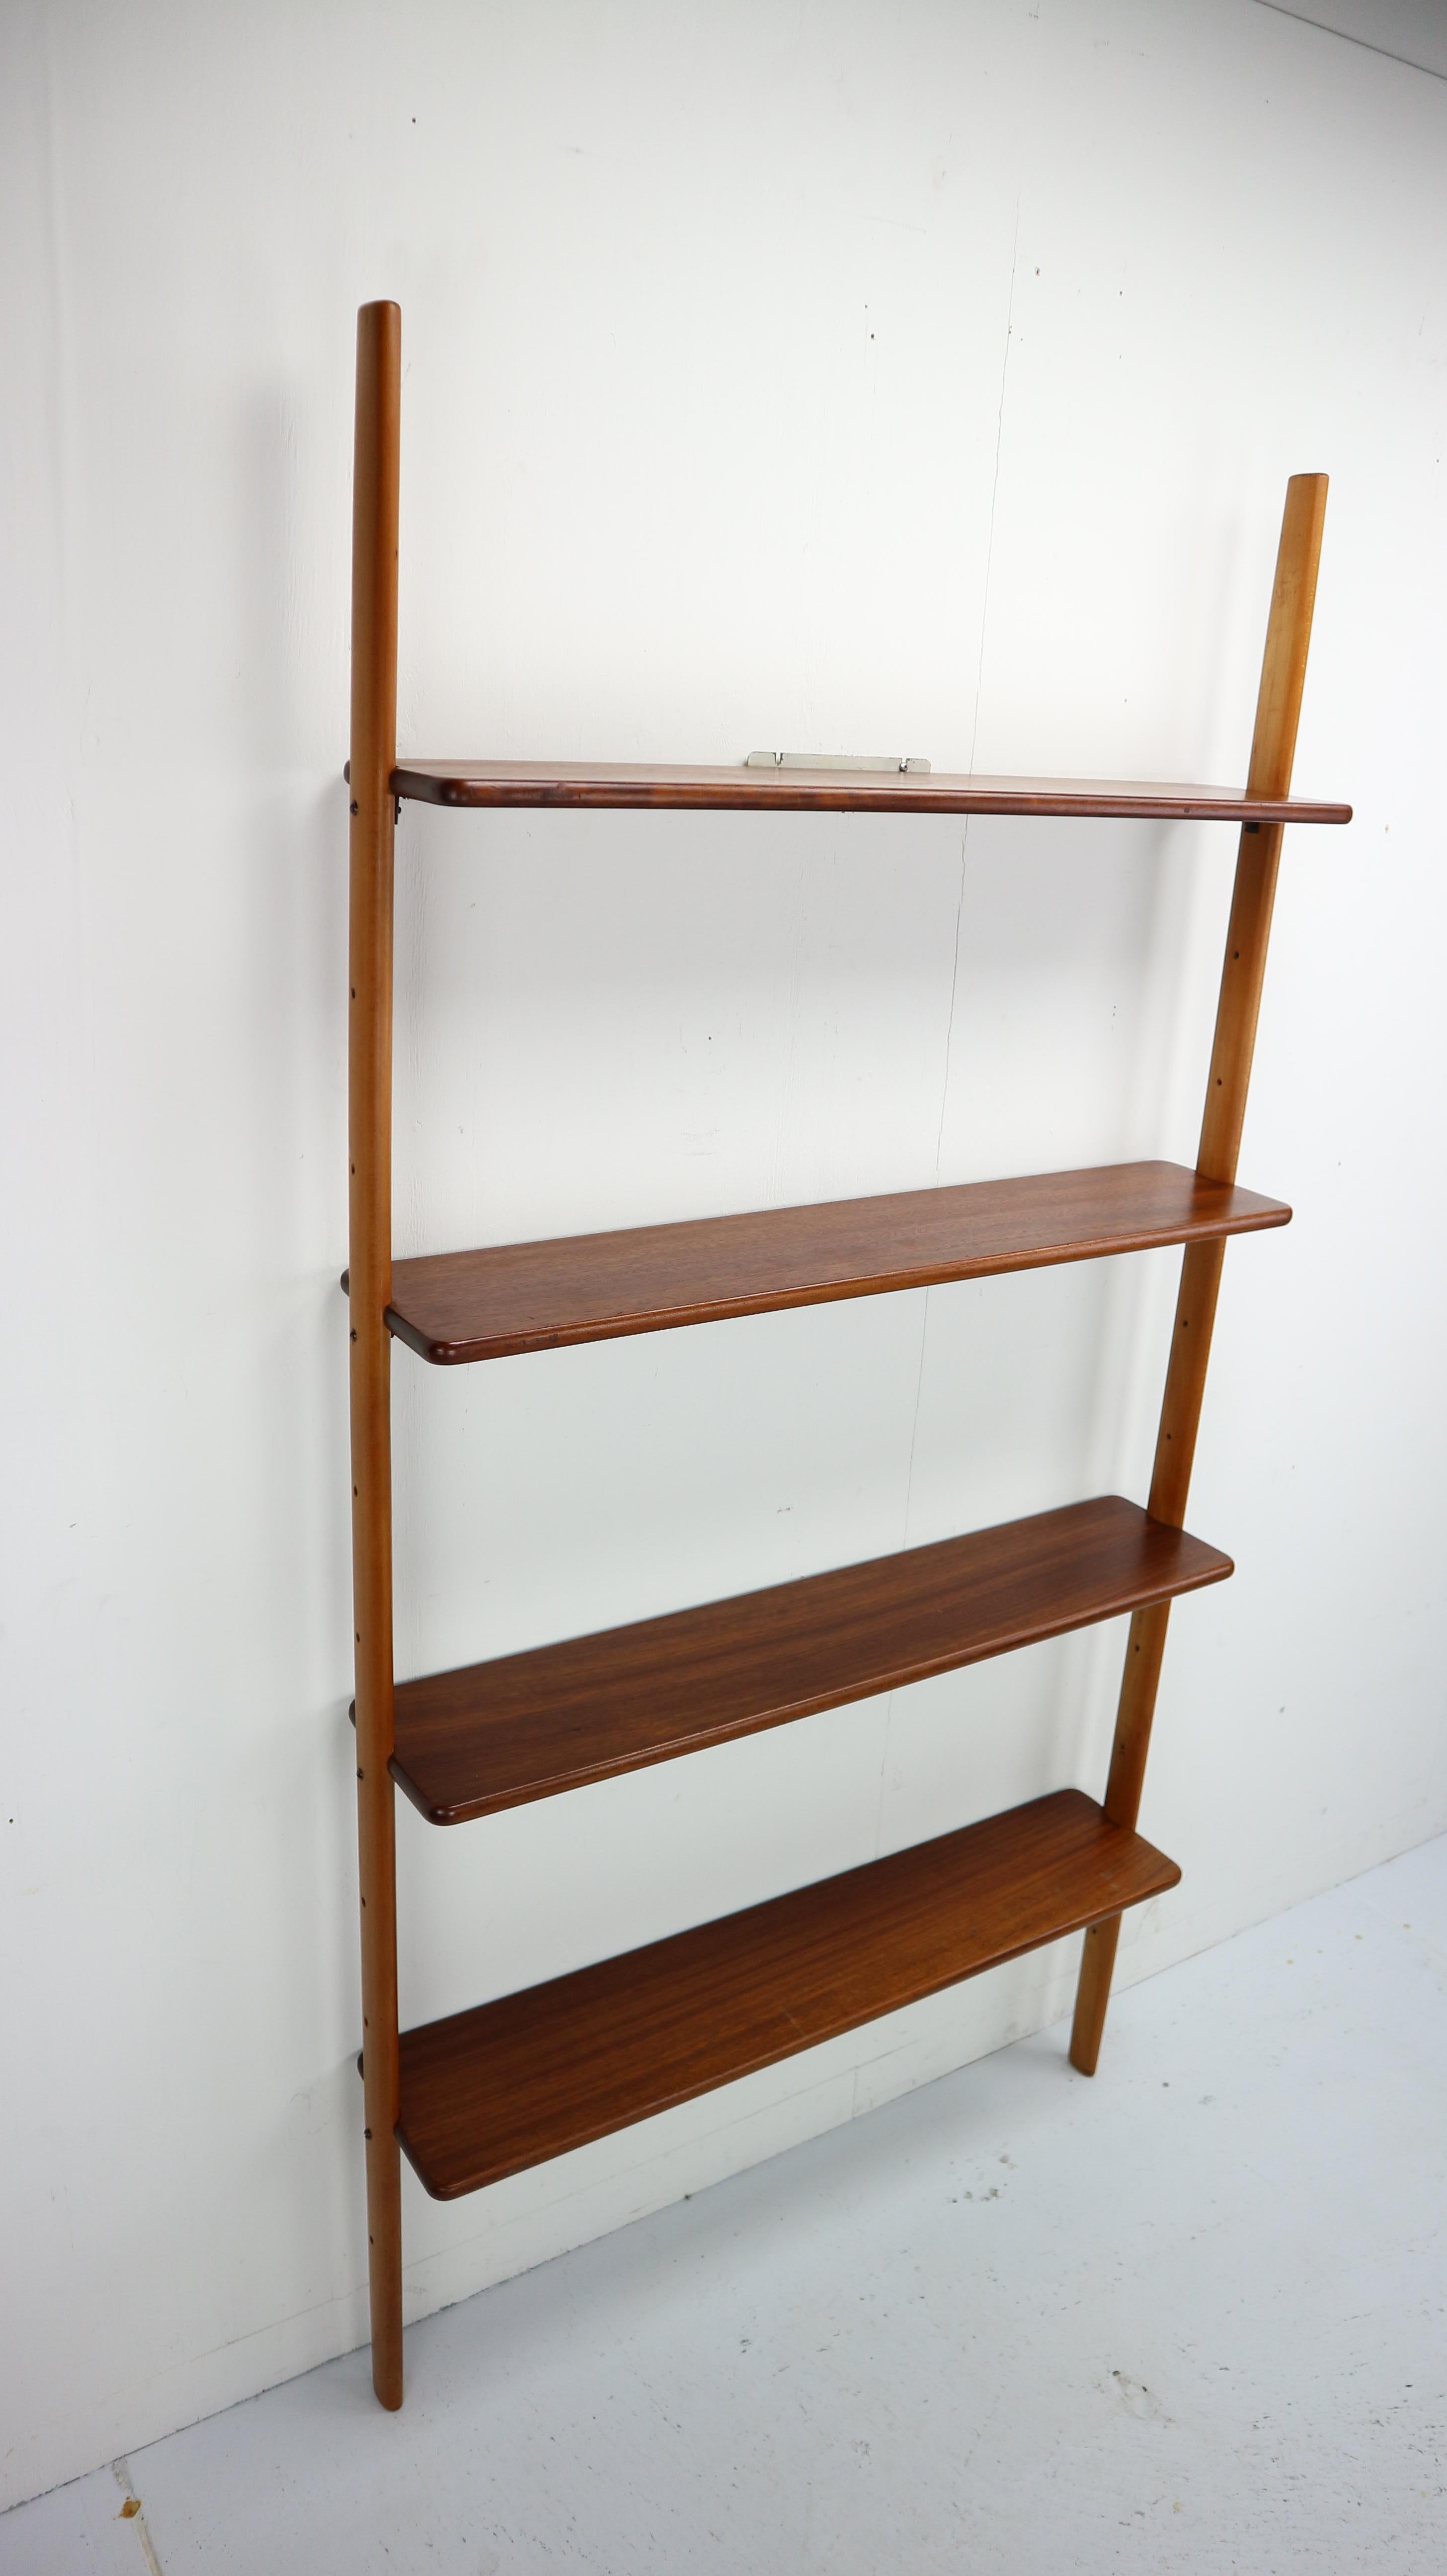 Danish modern wall unit by William Watting for Scanflex, Denmark 1950.

Elegant bookcase designed by American designer William Watting. Watting worked for several companies such as the Dutch Fristho and the Danish Michael Laursen, which worked with